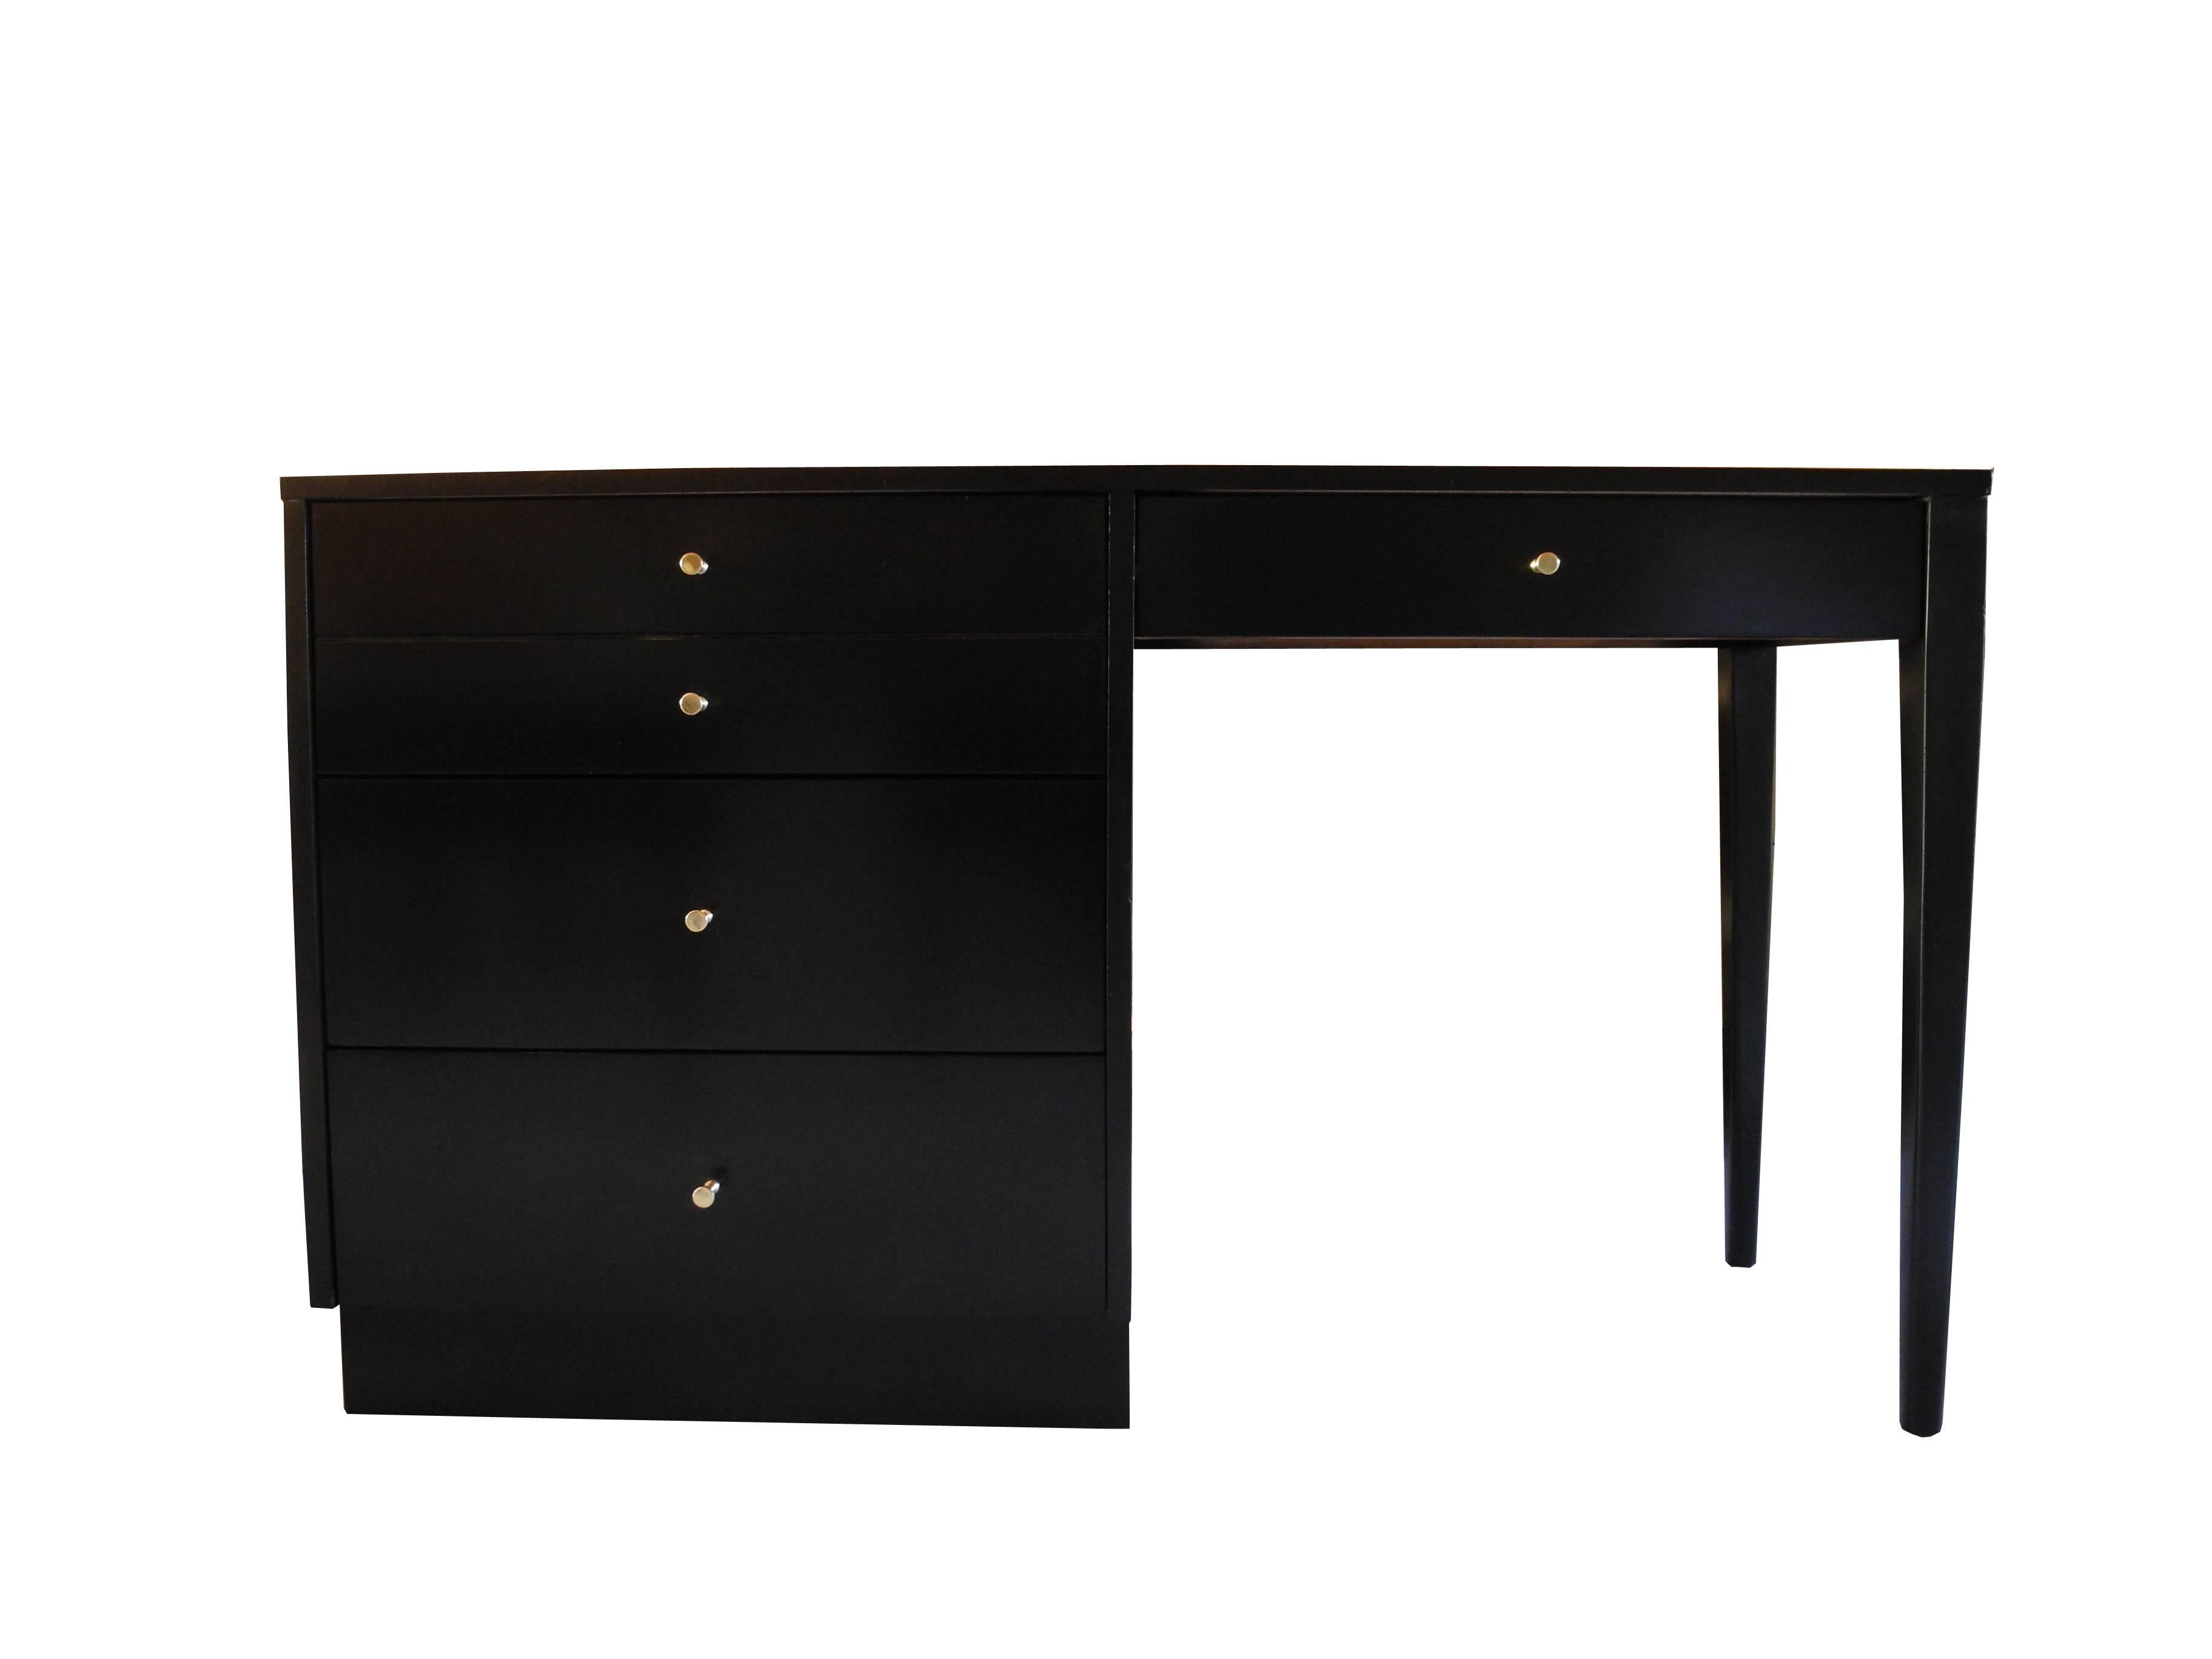 Mid-Century American Modern Black Maple Desk and Drawers by Paul McCobb im Zustand „Gut“ im Angebot in Hudson, NY